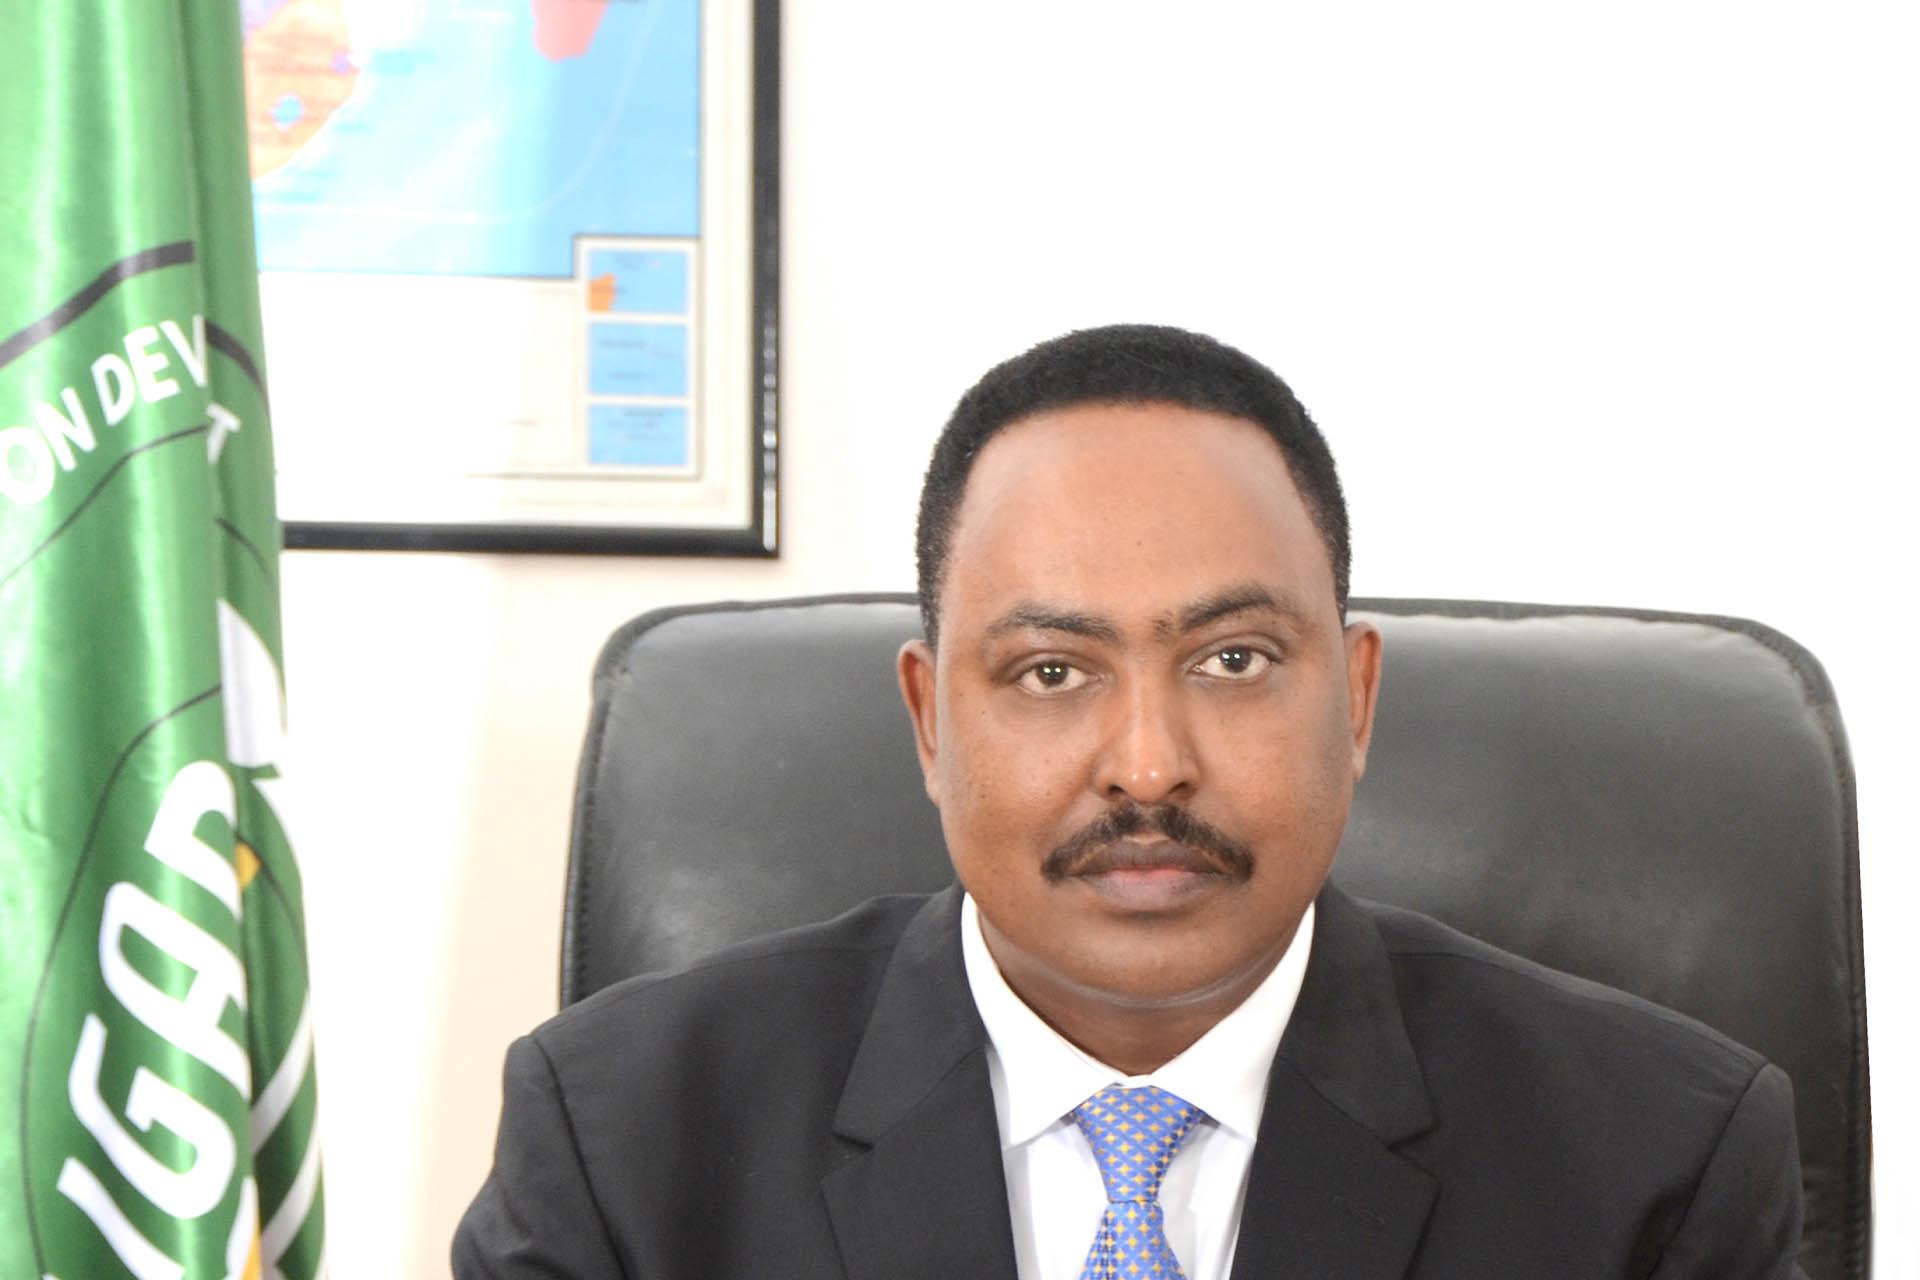 Opening Remarks by Dr. Workneh Gebeyehu, IGAD Executive Secretary on Introduction of the Gender Equality Seal Certification Process “Action for Sustainable organizational transformation towards Gender Equality” Tuesday, 21st June 2022